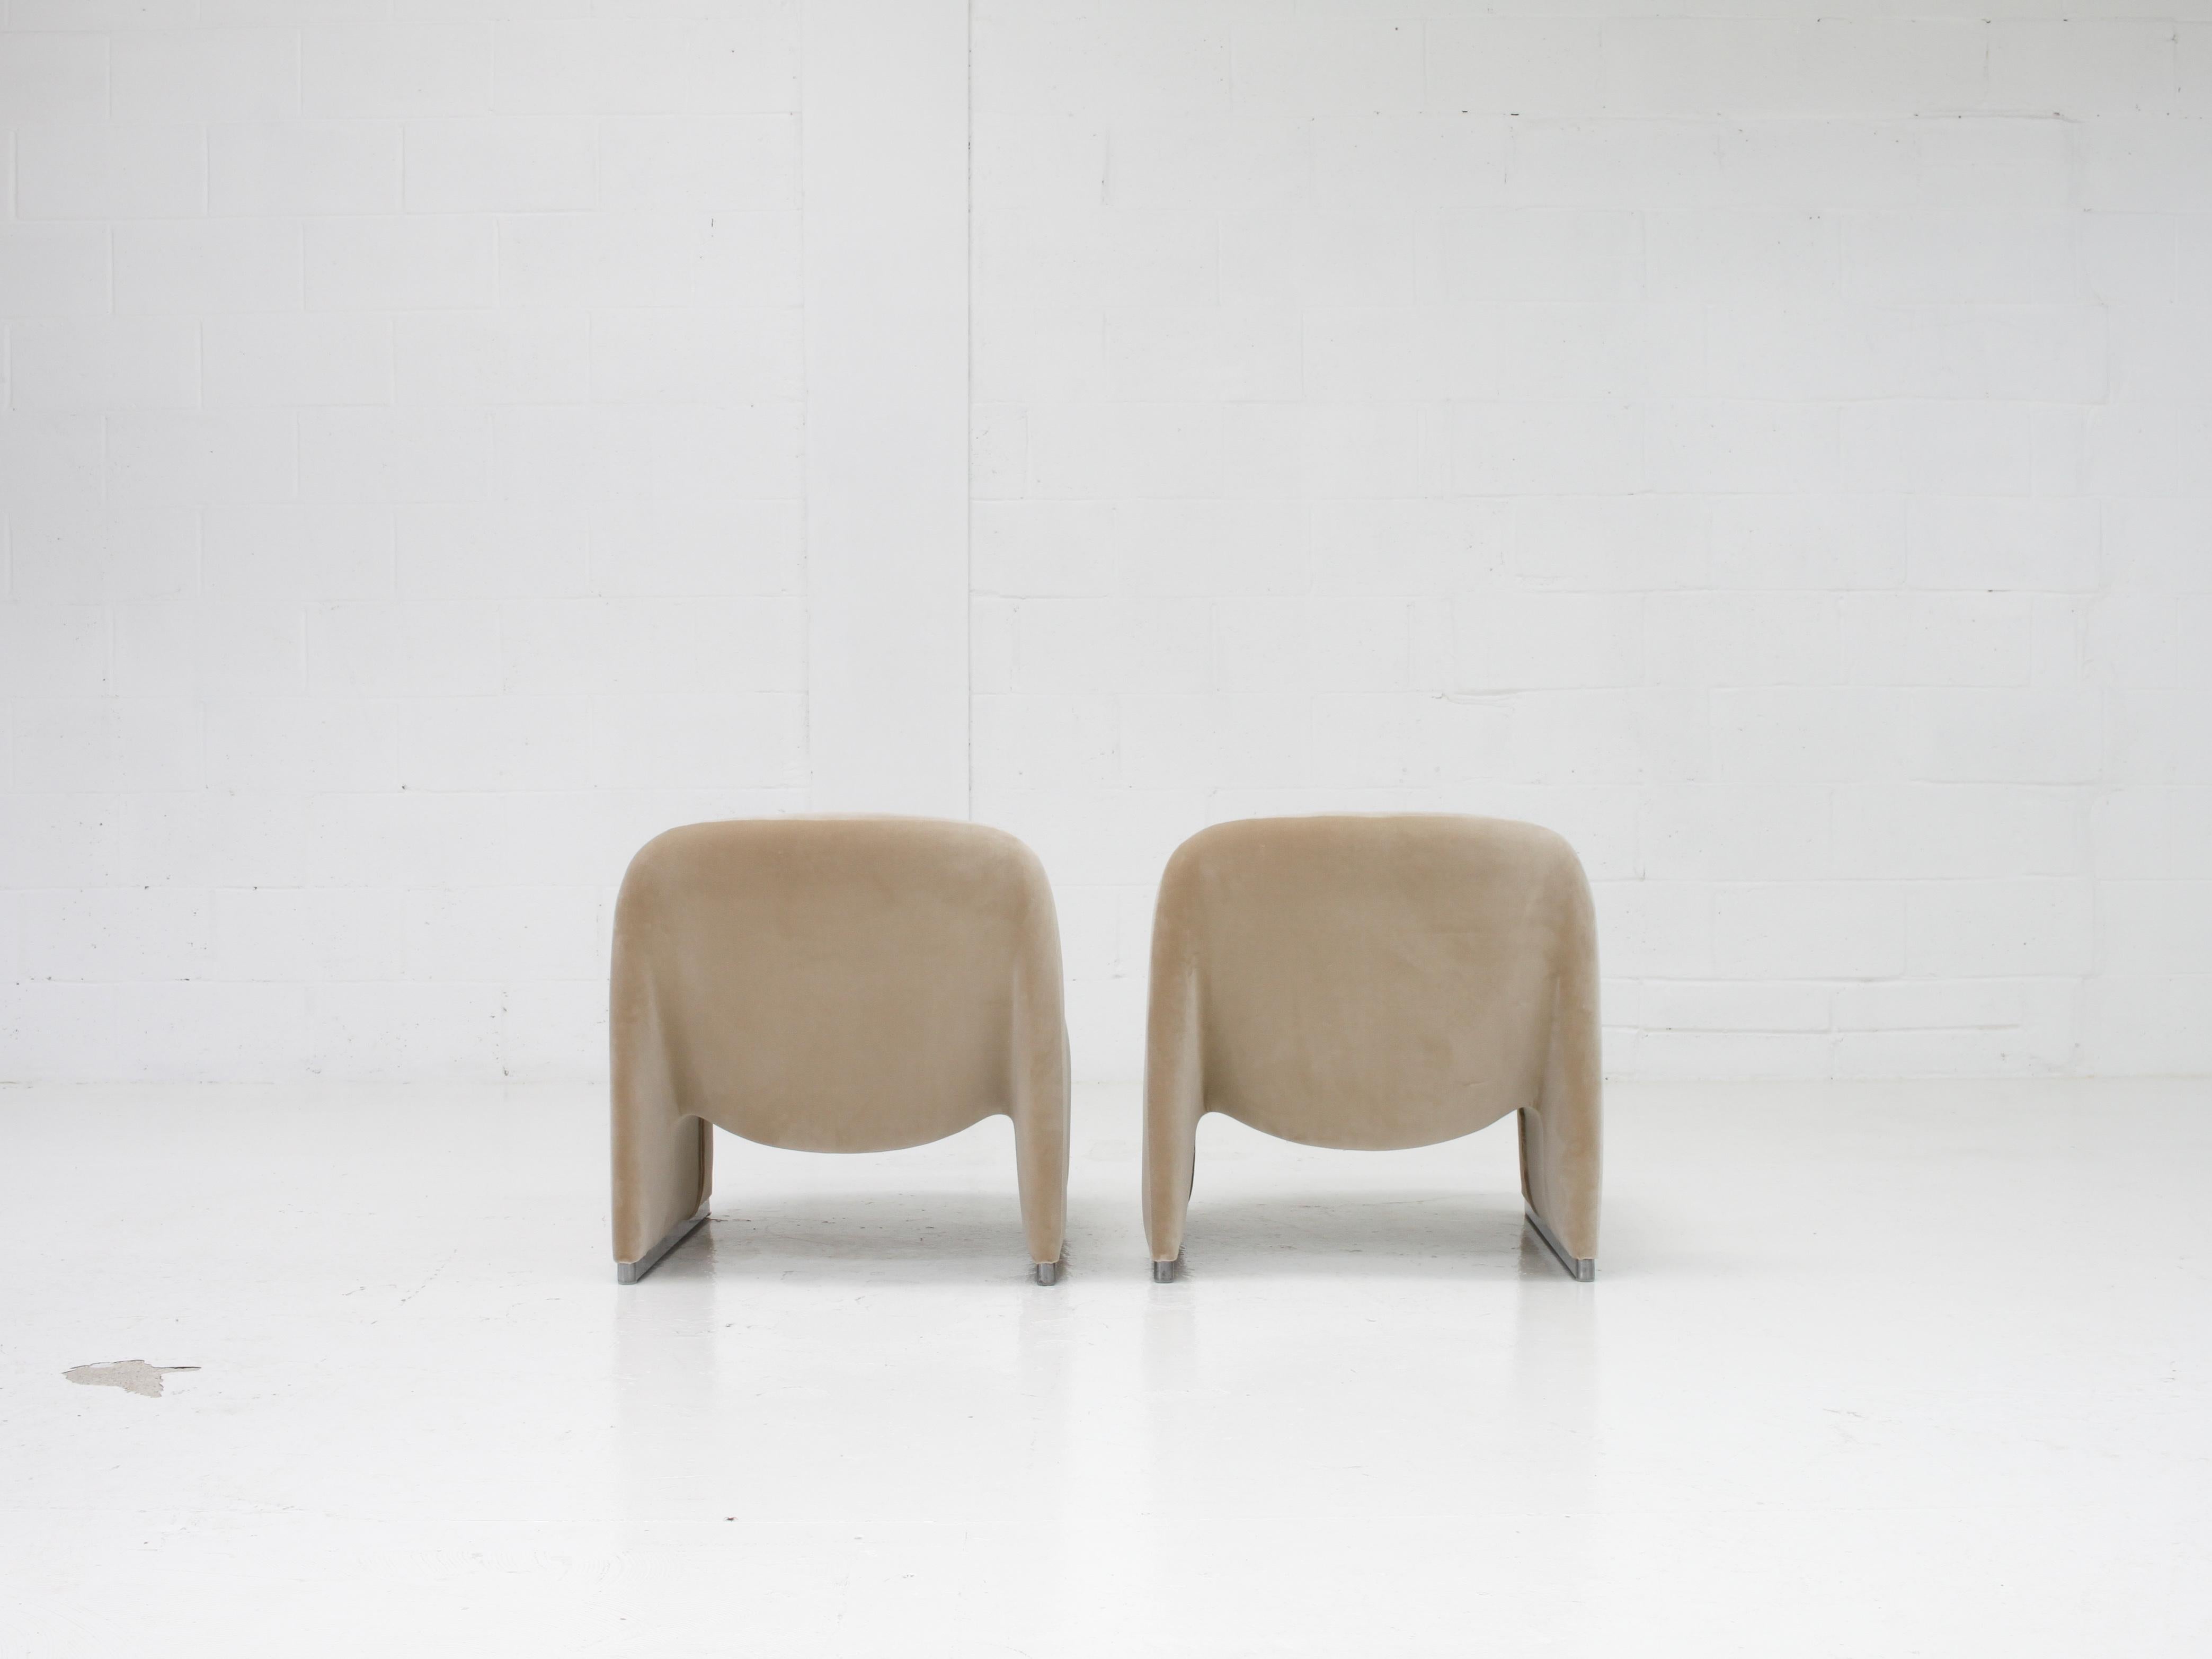 Pair of Giancarlo Piretti “Alky” Chairs - PREPARED FOR UPHOLSTERY In Good Condition In London Road, Baldock, Hertfordshire